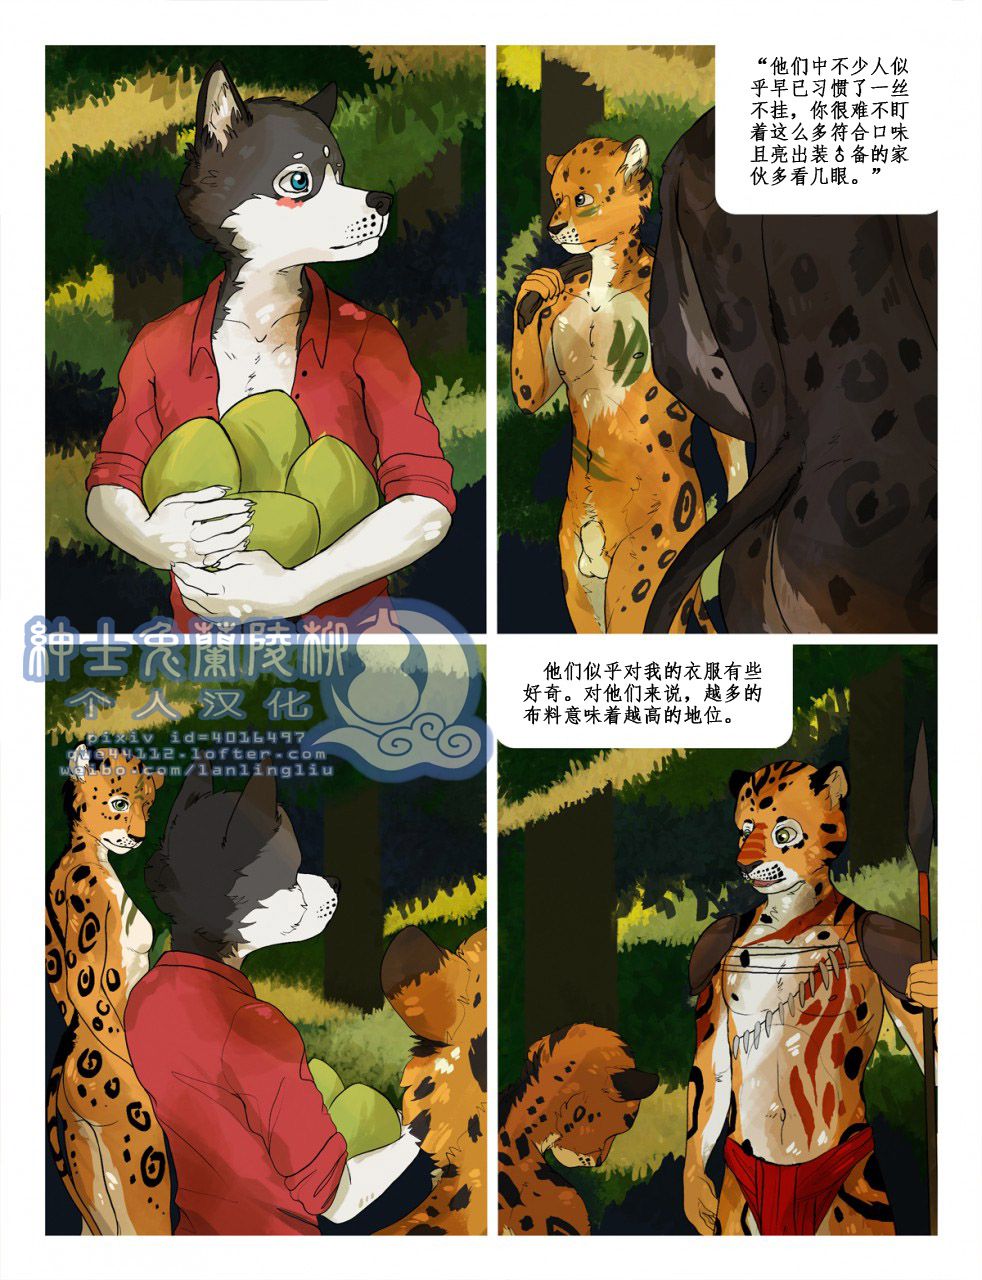 [Edesk Sisco] 失与寻 Lost and Found [Chinese] [绅士兔兰陵柳个人汉化] [Ongoing] [翻译进行中] 35